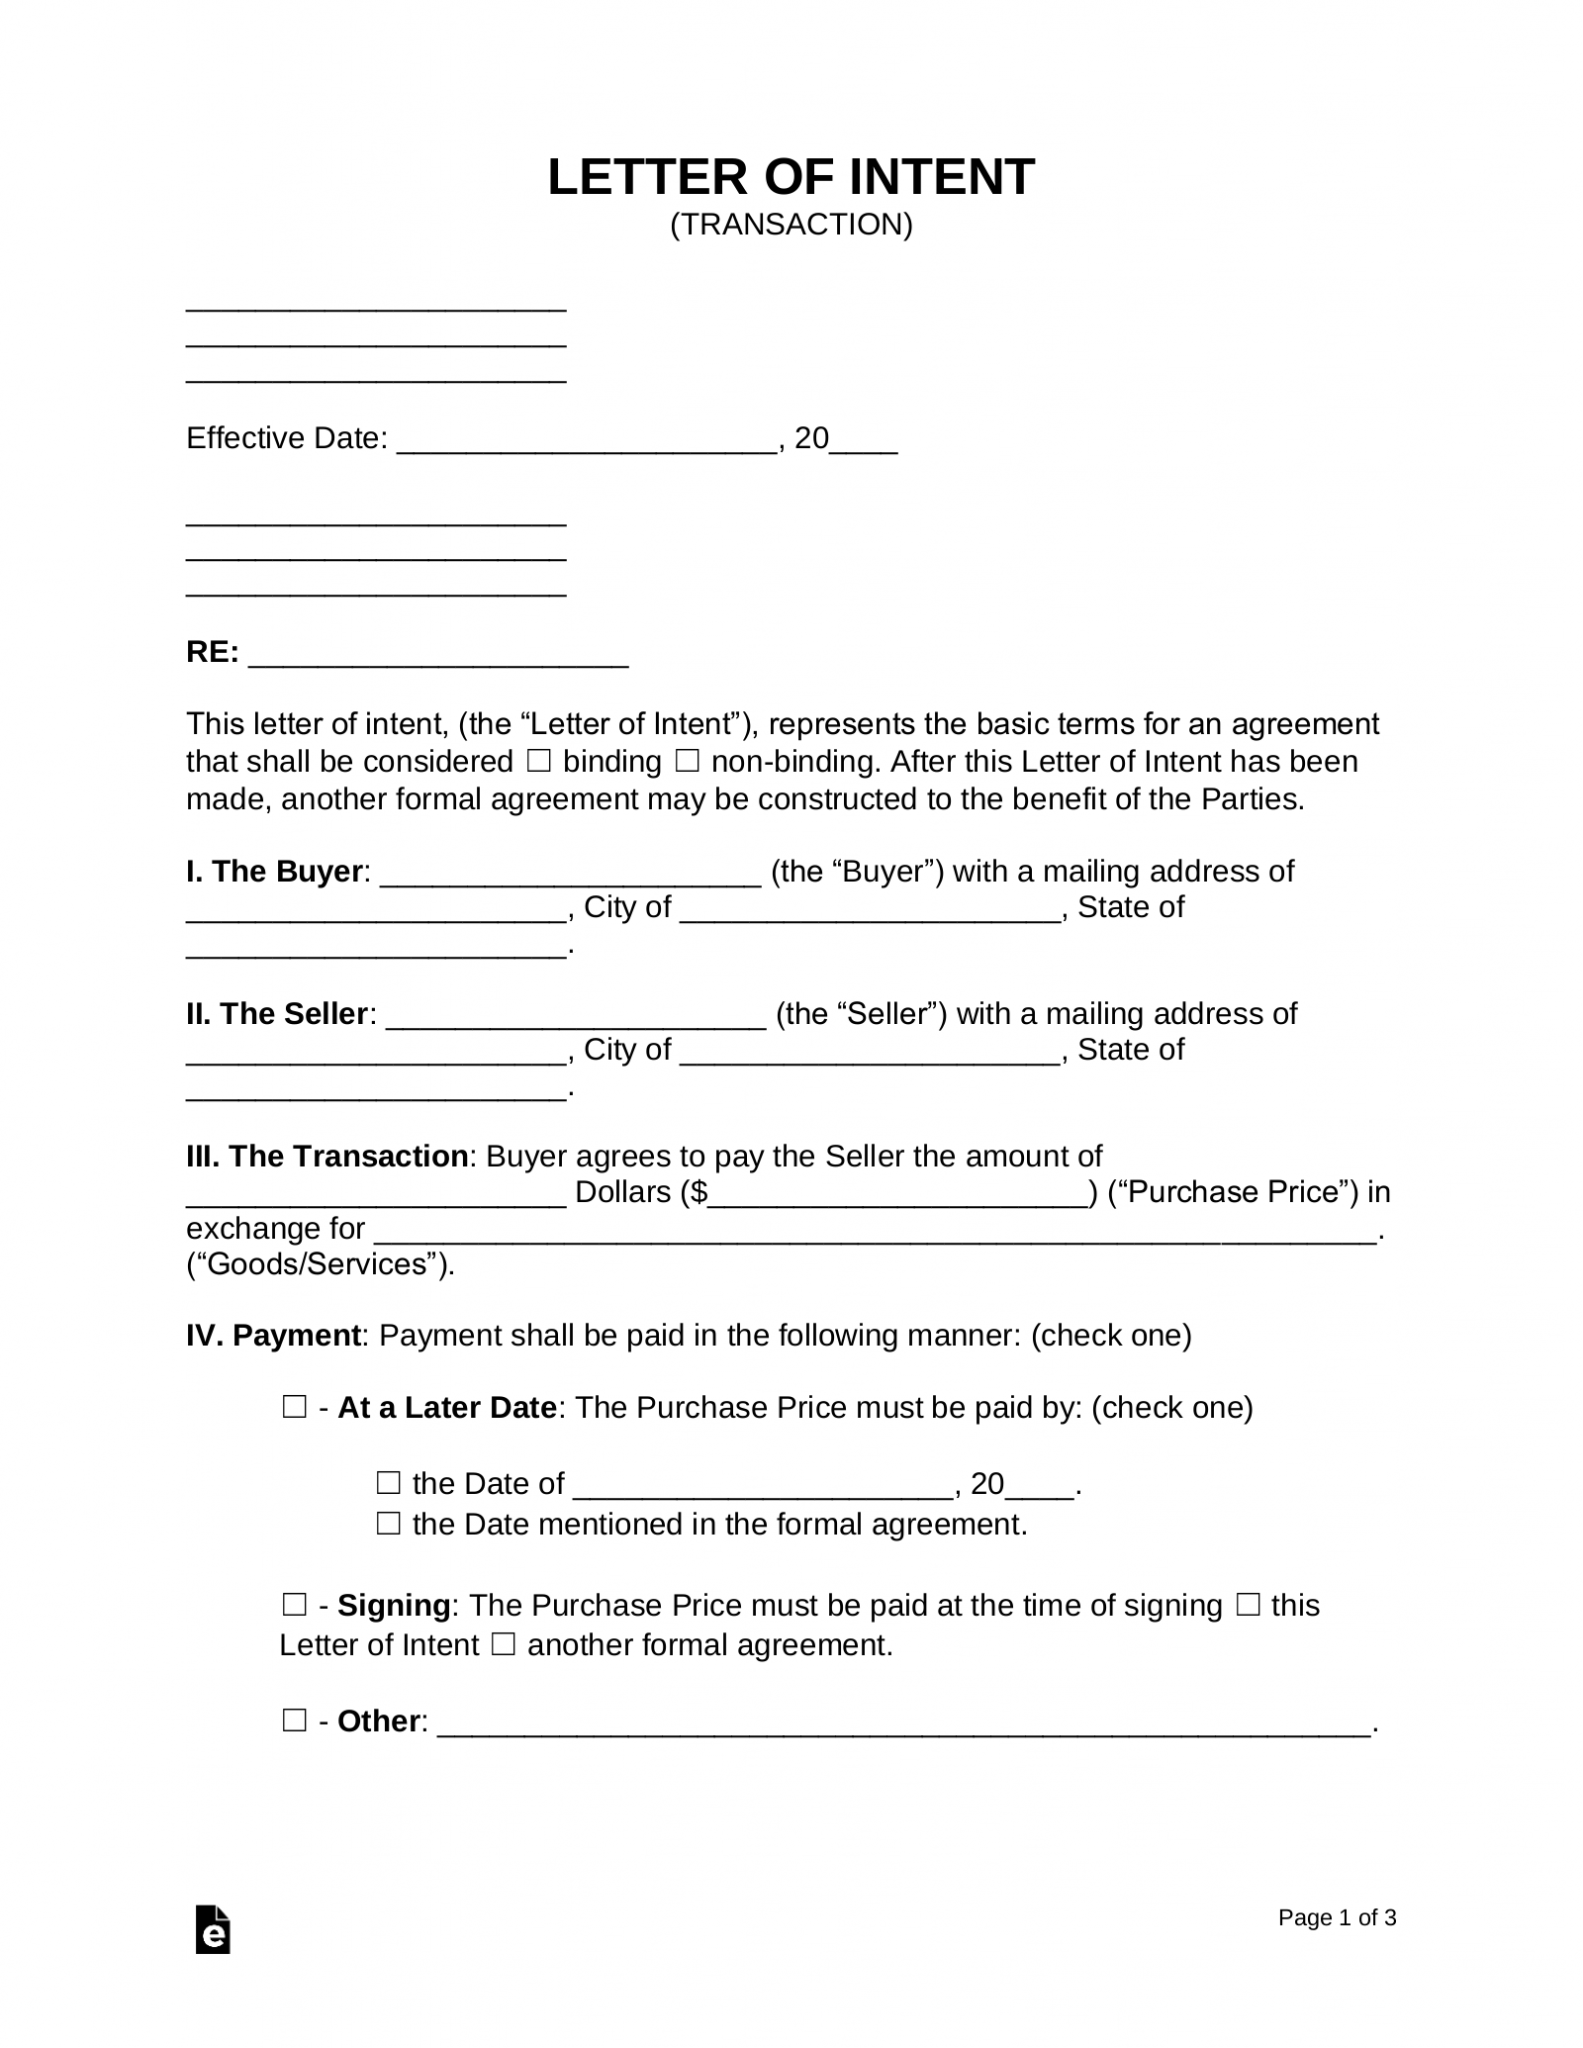 Free Letter of Intent (LOI) Templates (14) PDF Word eForms